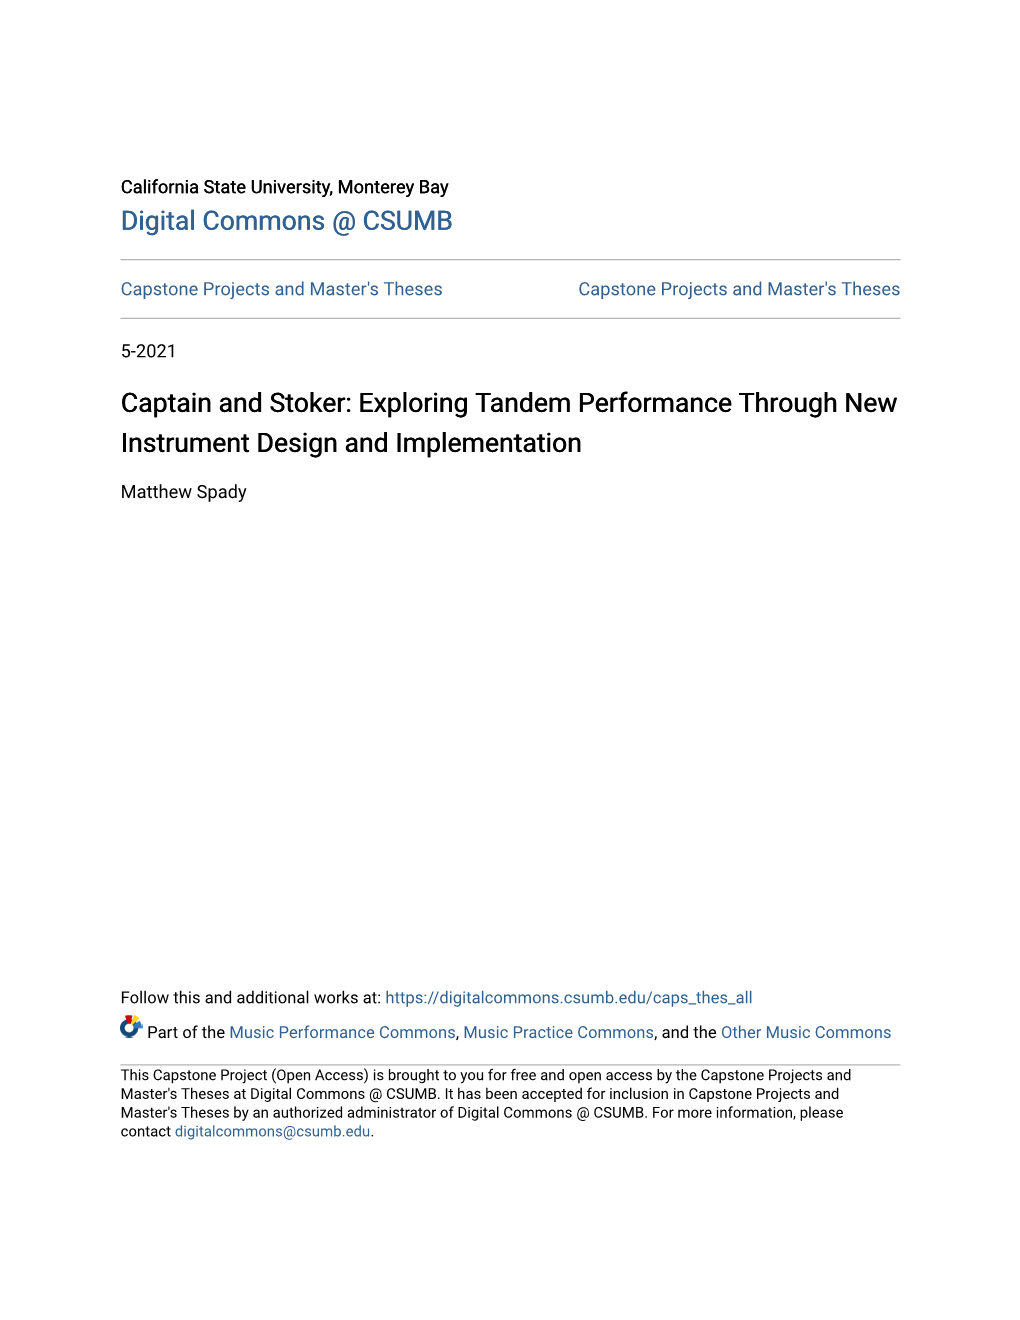 Exploring Tandem Performance Through New Instrument Design and Implementation